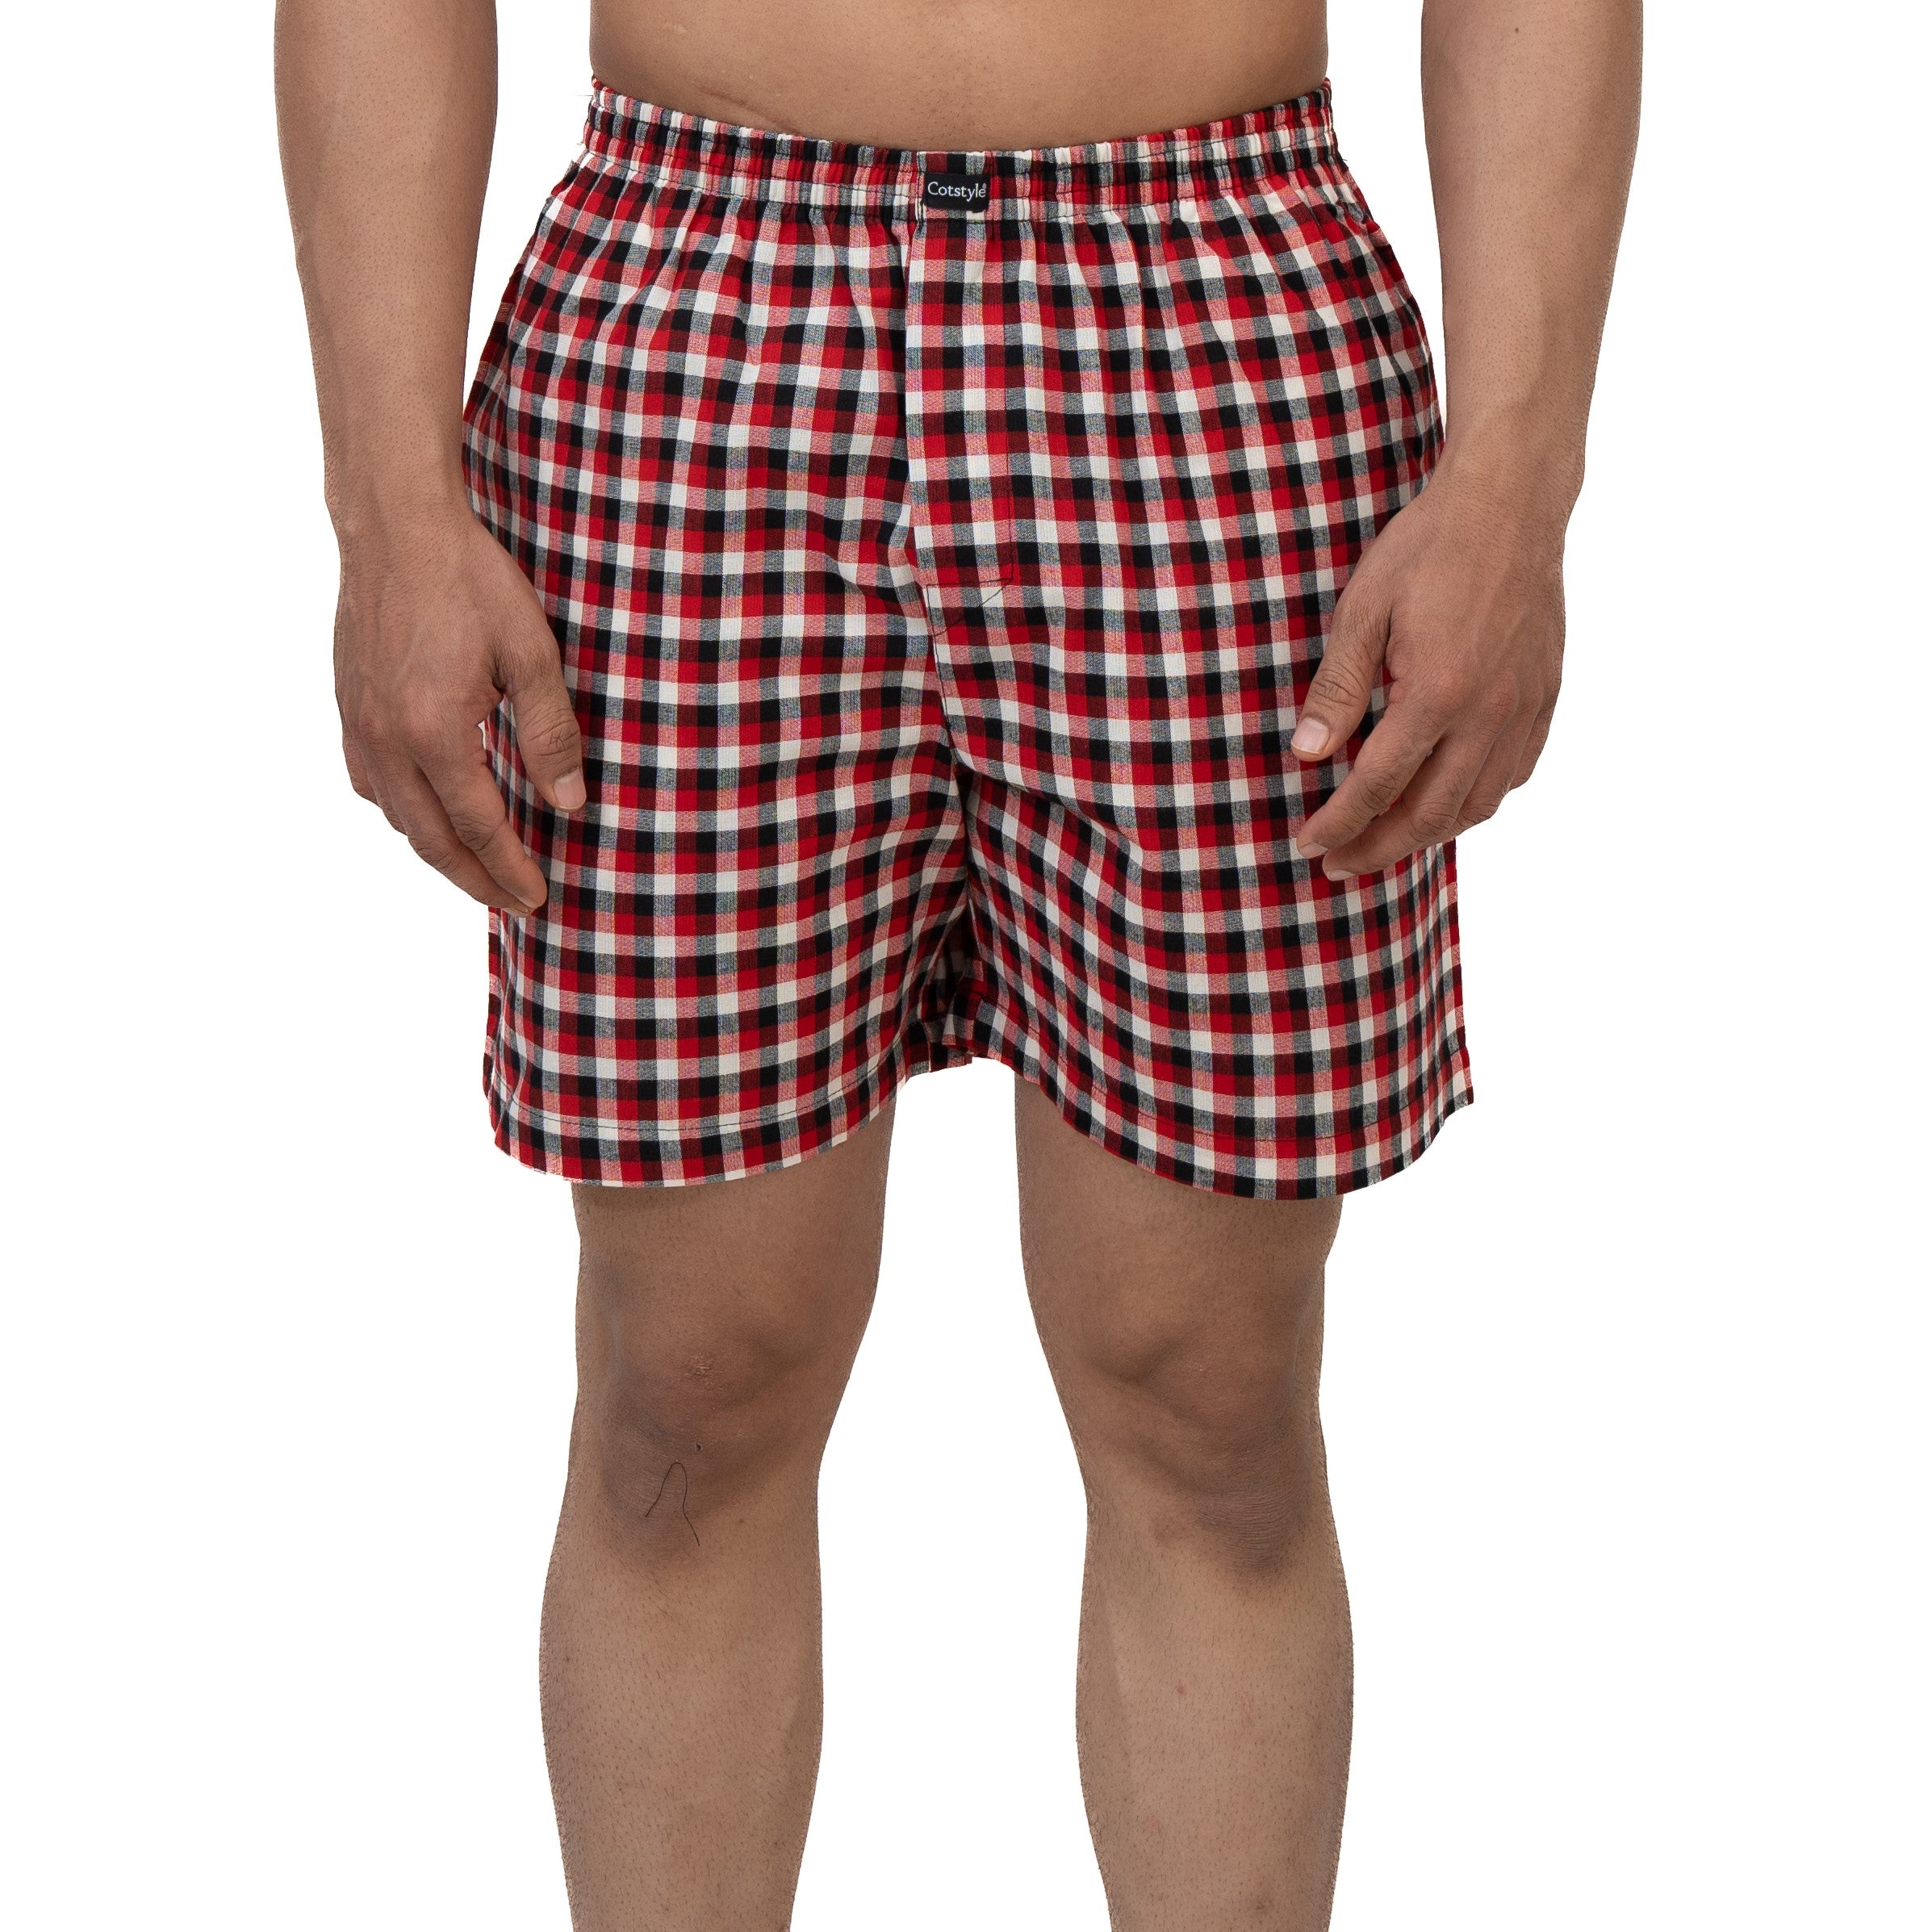 Cotstyle Red & Black Colour Cotton Fabrics Checks Printed Above Knee Length Casuals Mens Wear Boxers - Pack of 2